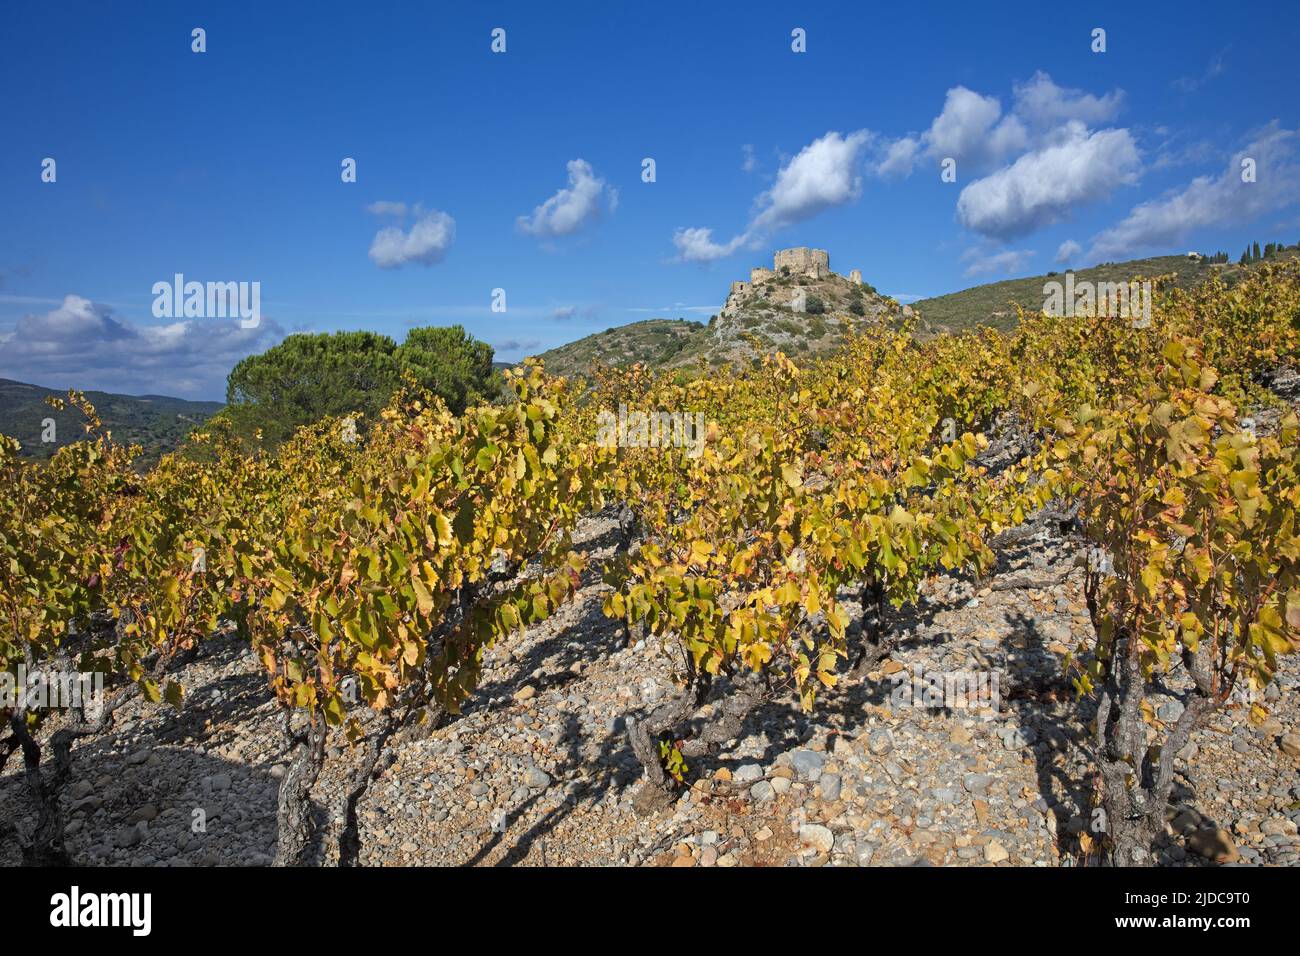 France, Aude Tuchan, the castle of Aguilar from the vineyard Stock Photo